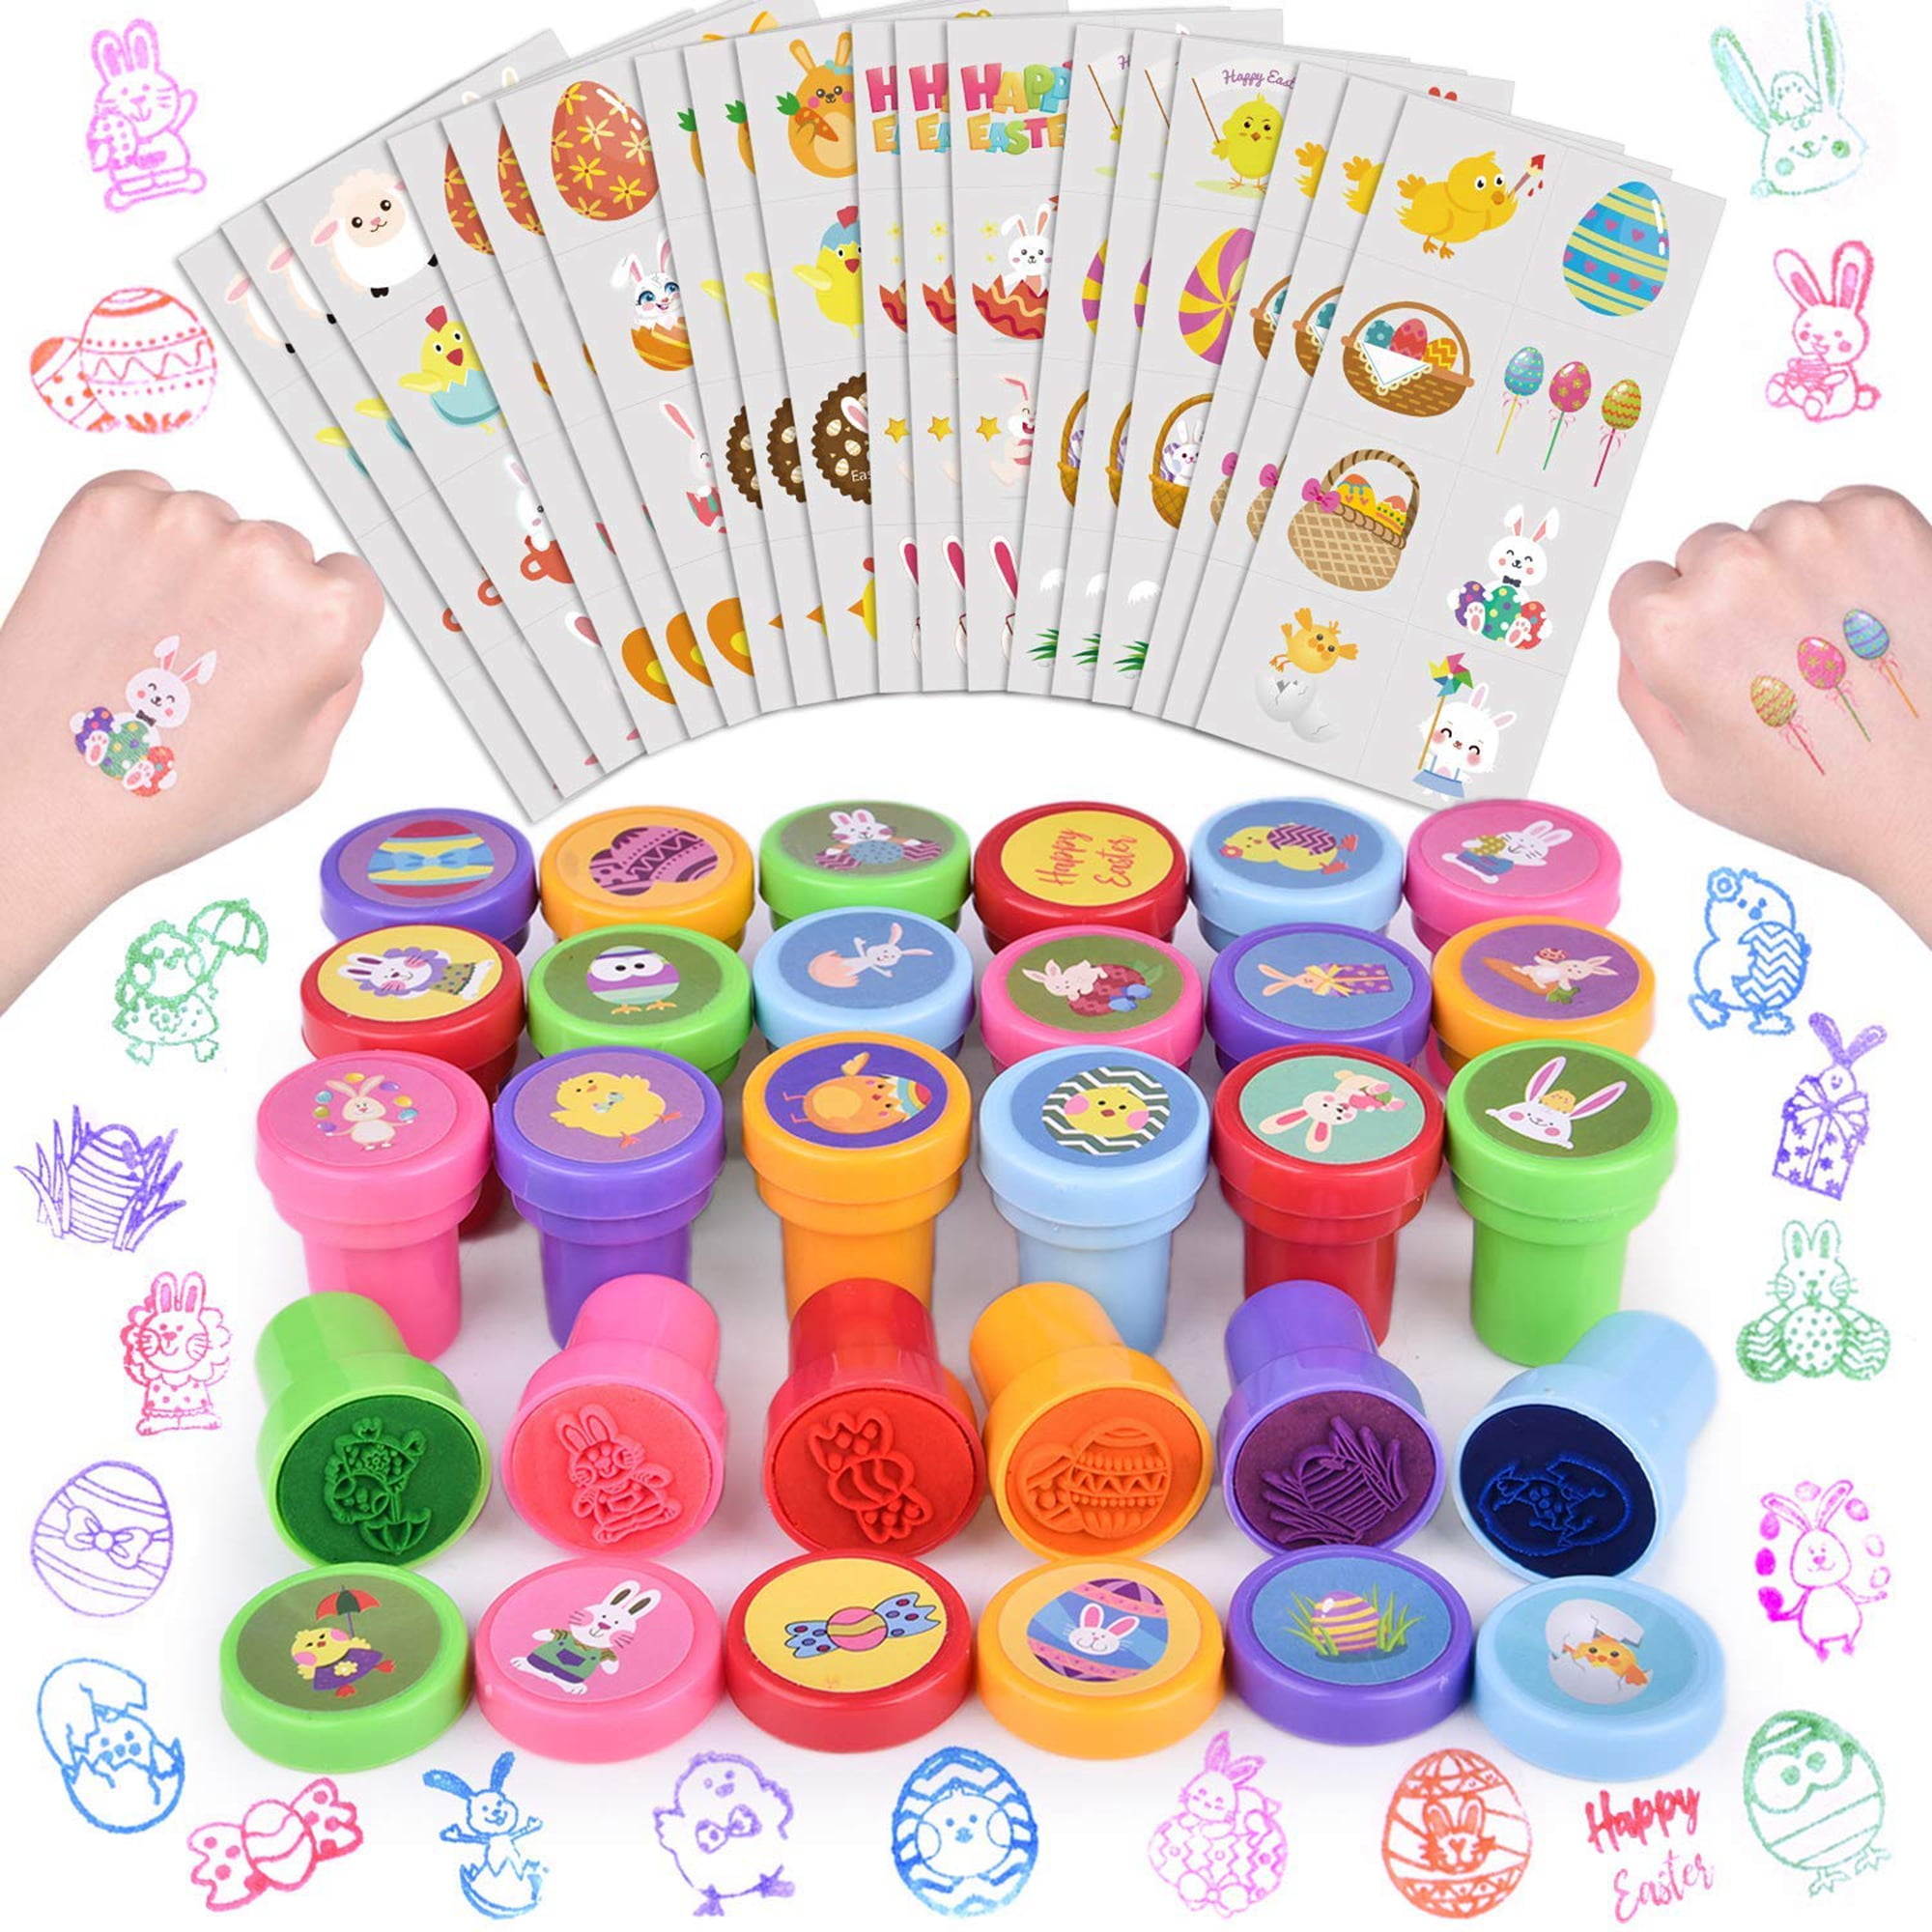 13 Designs Fun Stickers Childrens Party Bag Kids Fillers Arts Crafts 